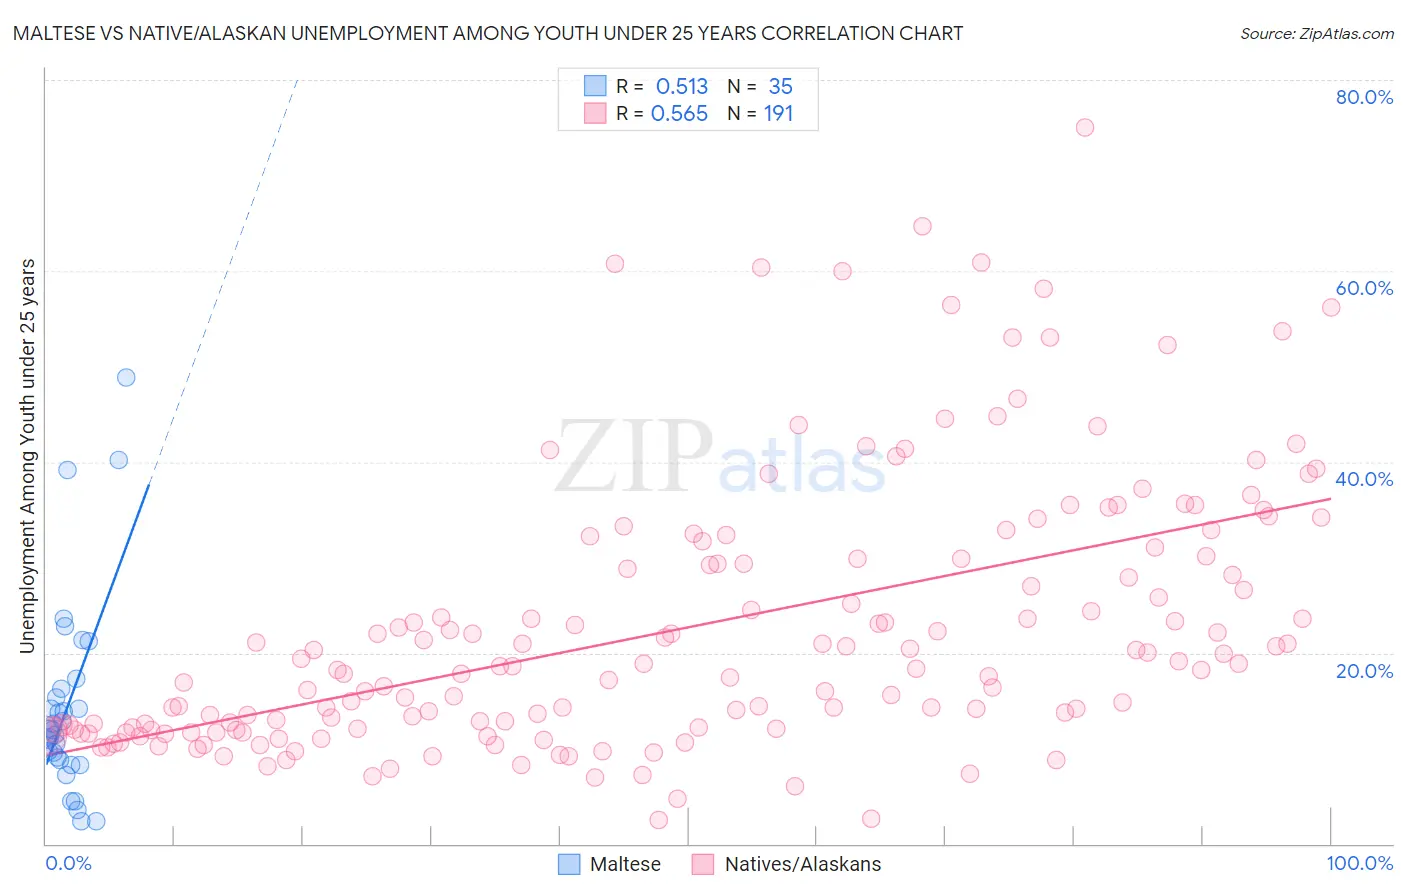 Maltese vs Native/Alaskan Unemployment Among Youth under 25 years